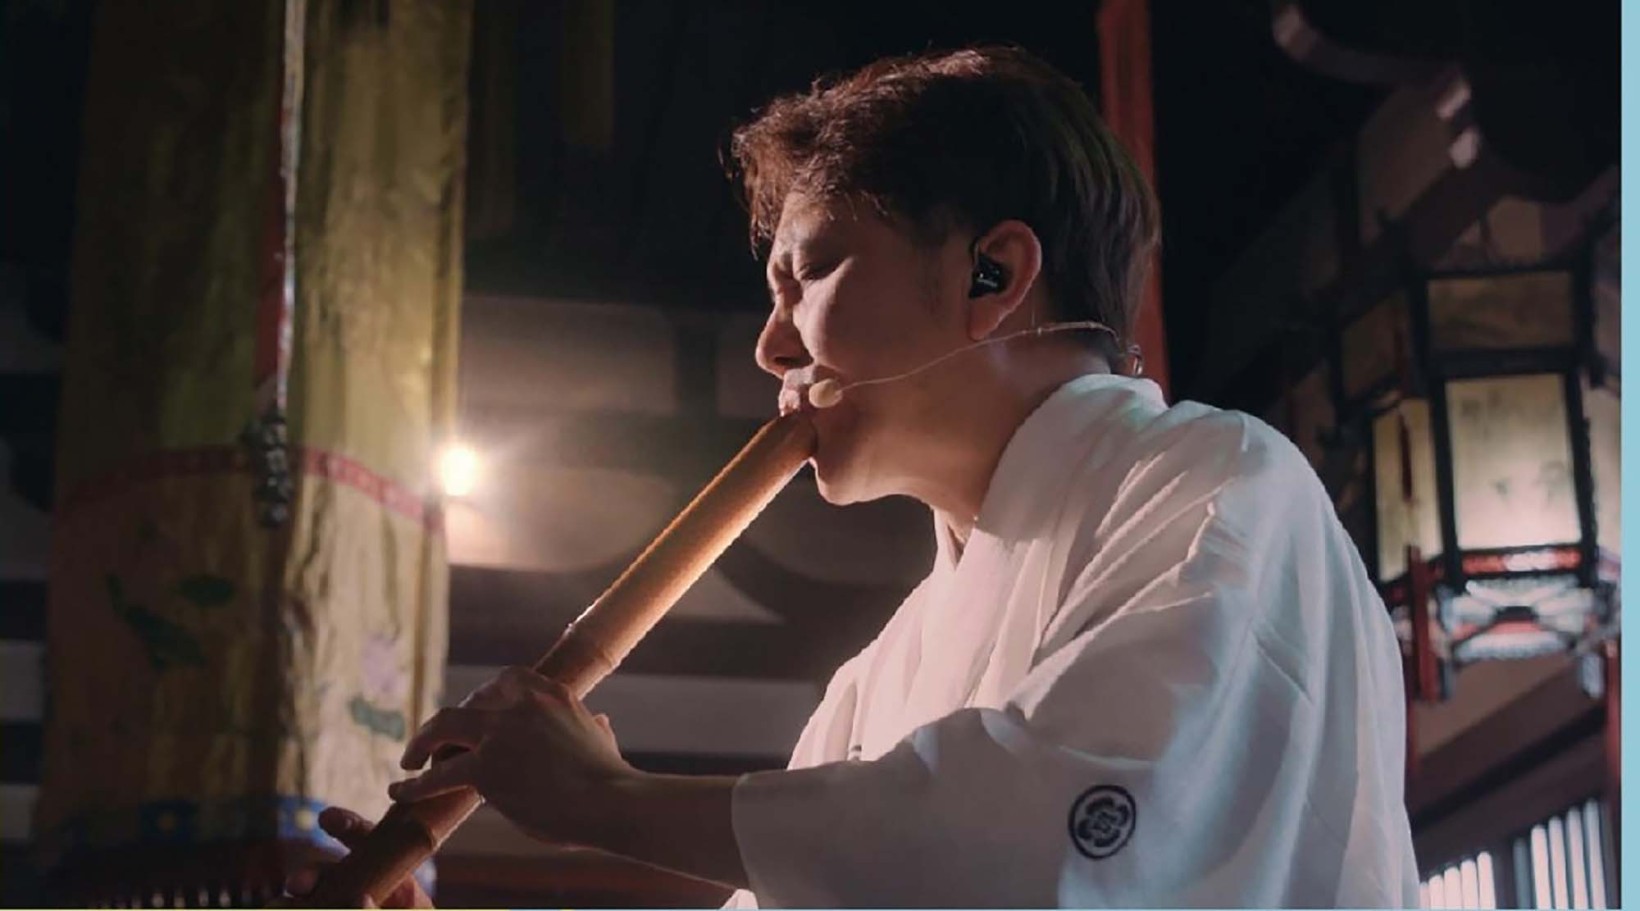 Shakuhachi music documentary featured in film series on chasing dreams